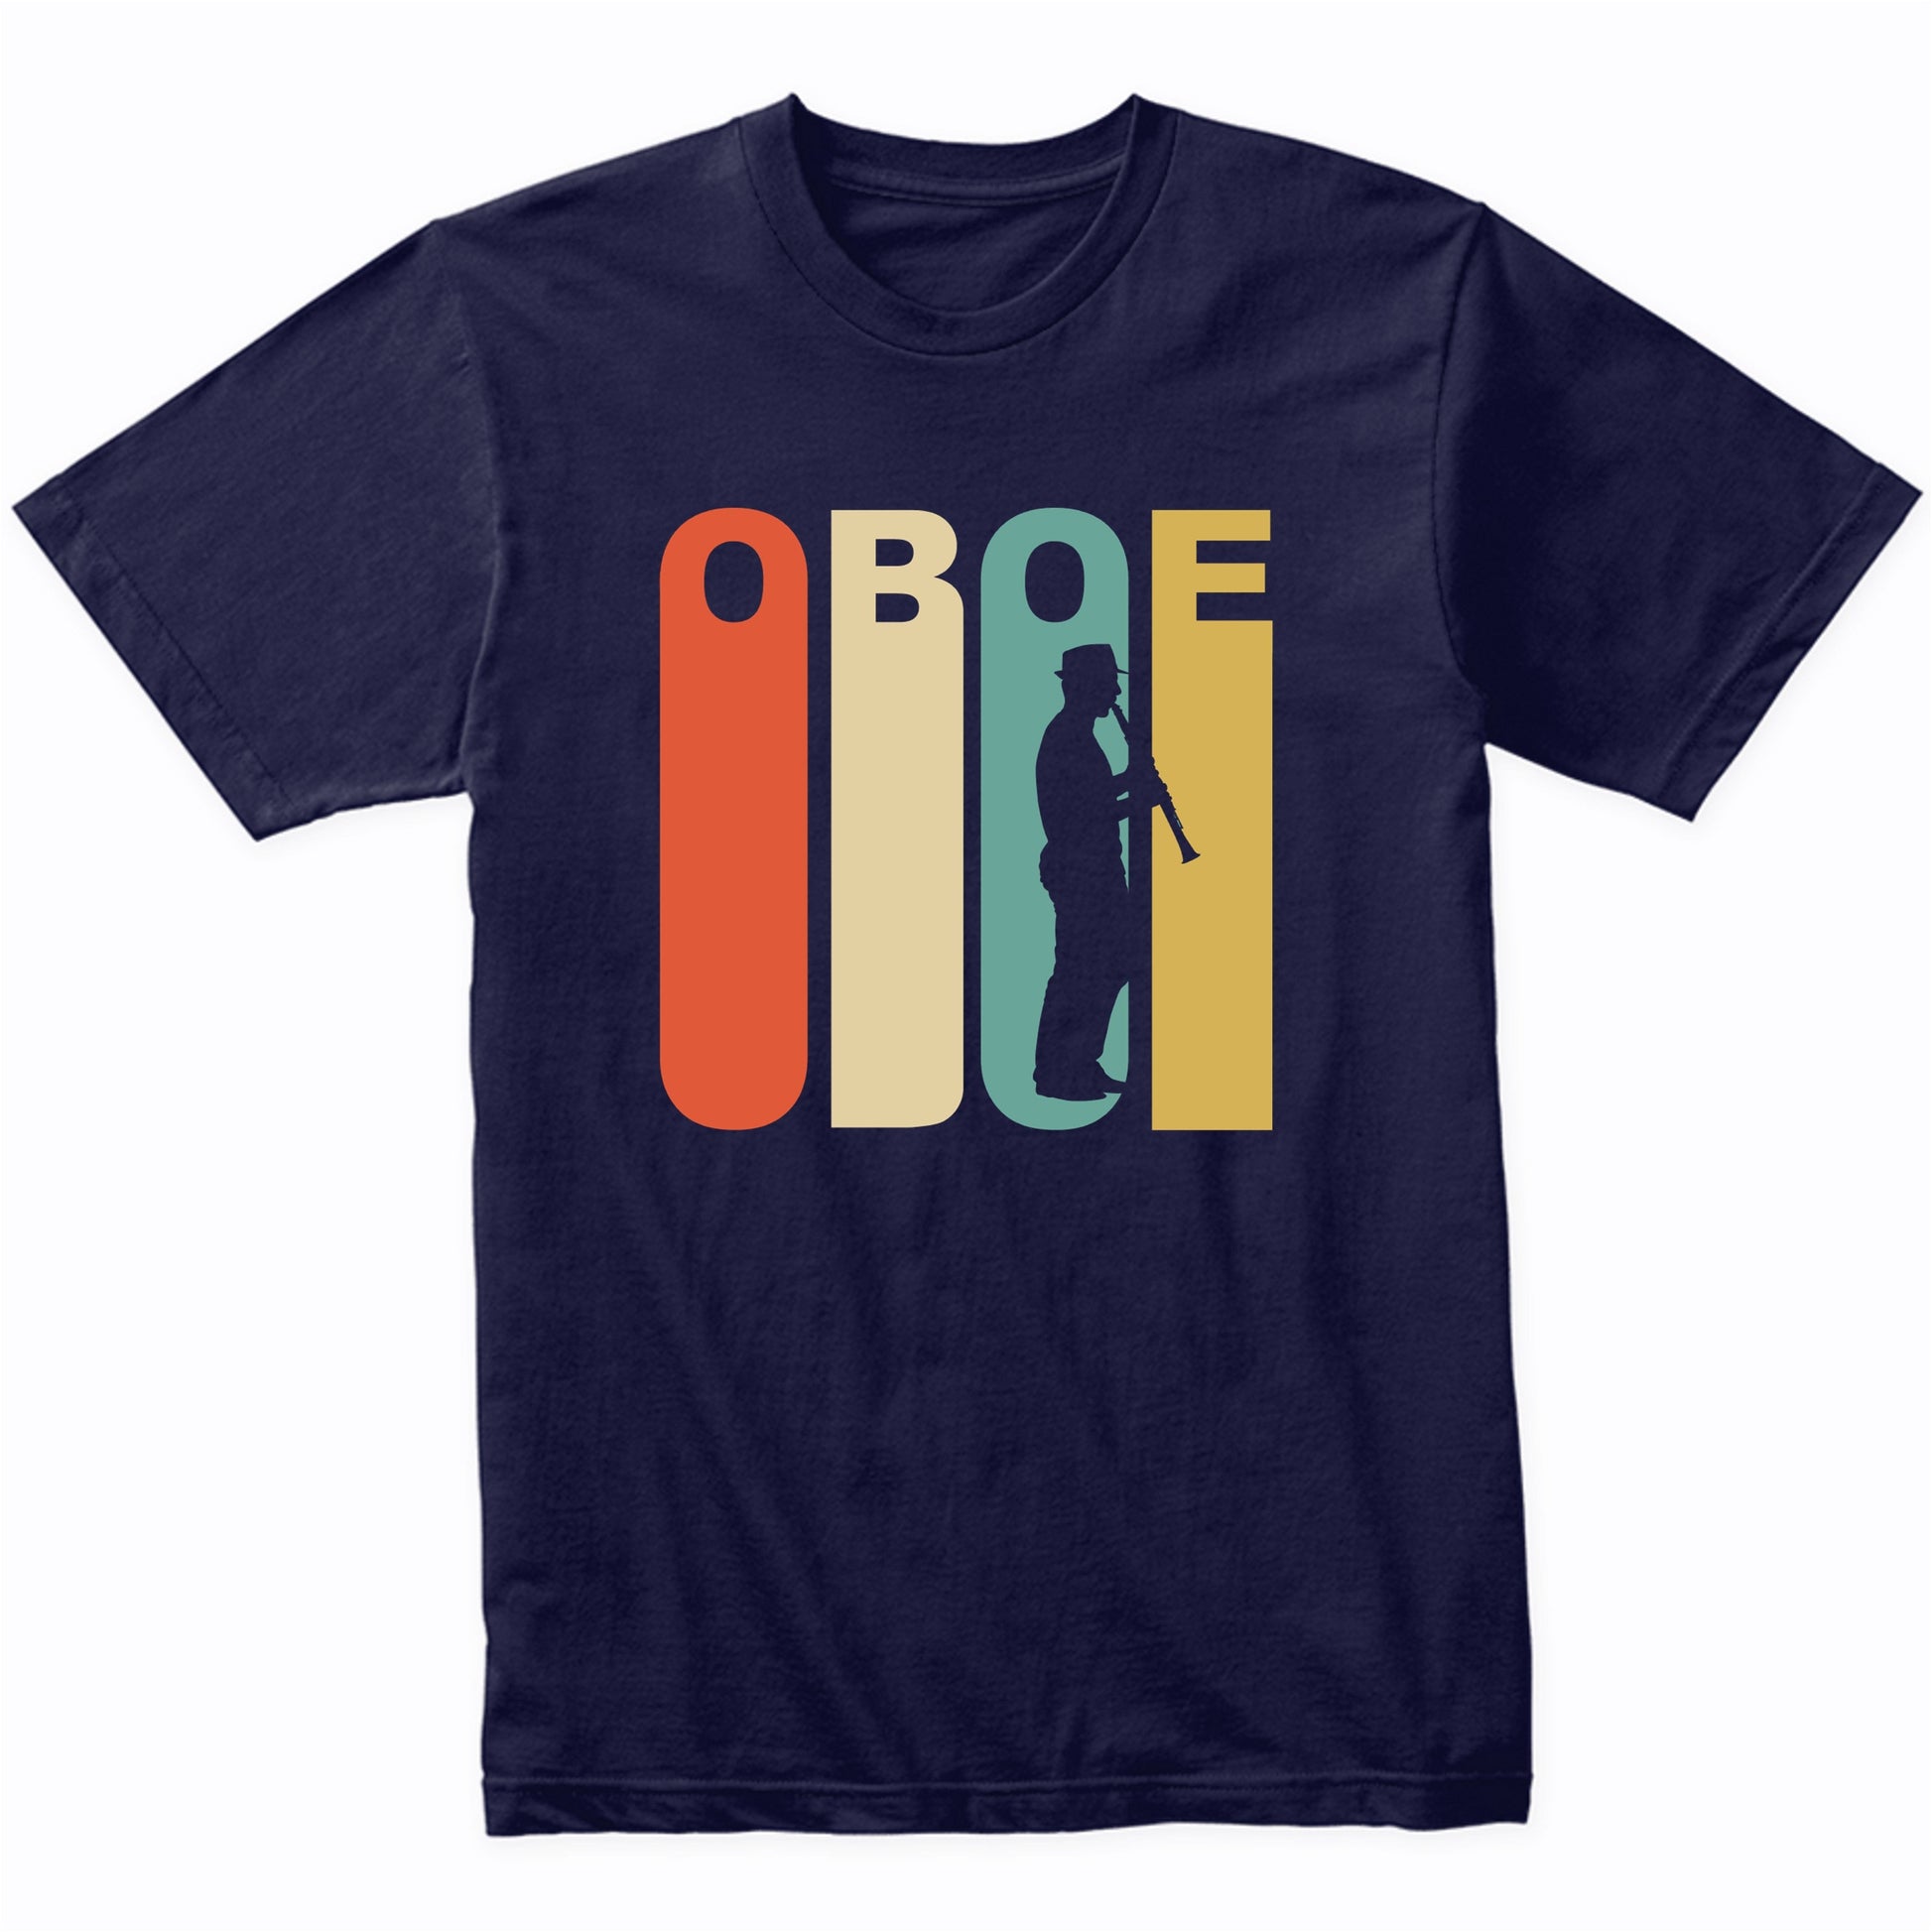 Retro 1970's Style Oboe Player Silhouette Music T-Shirt